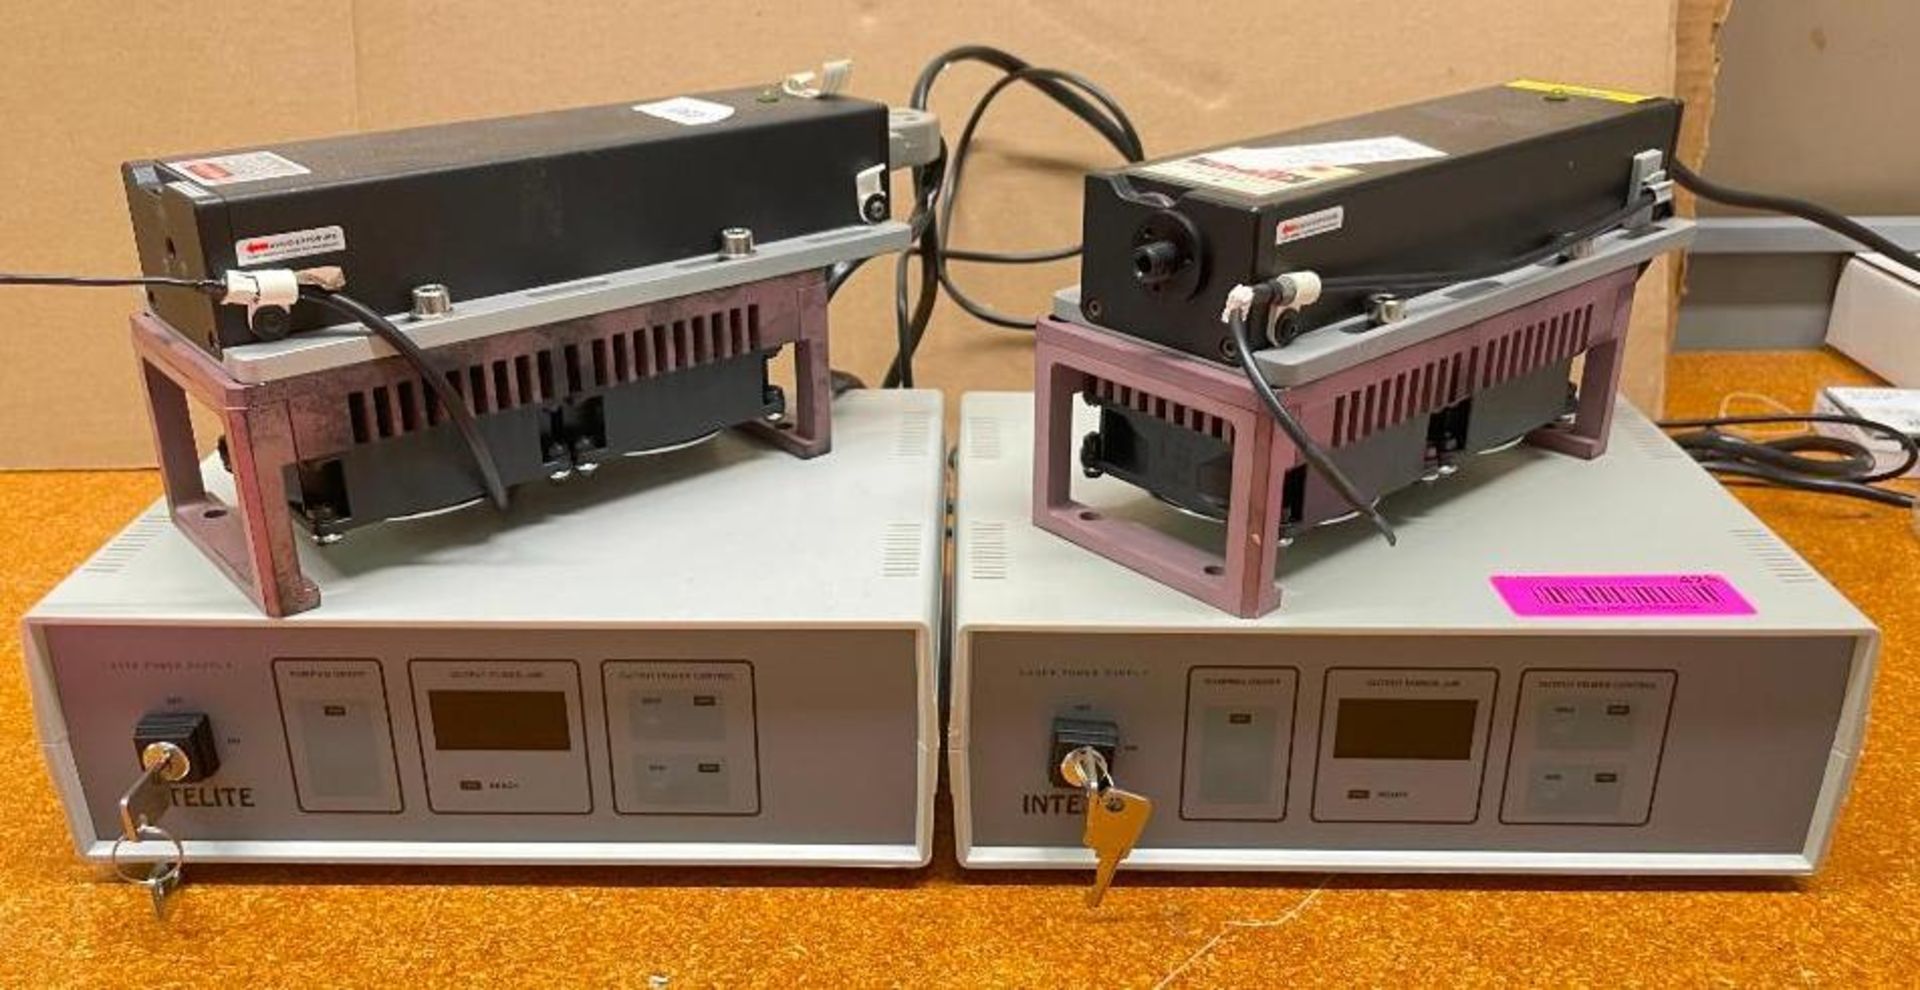 (2) 532 nm LASERS BRAND/MODEL: INTELITE INFORMATION: FOR PARTS QTY: 2